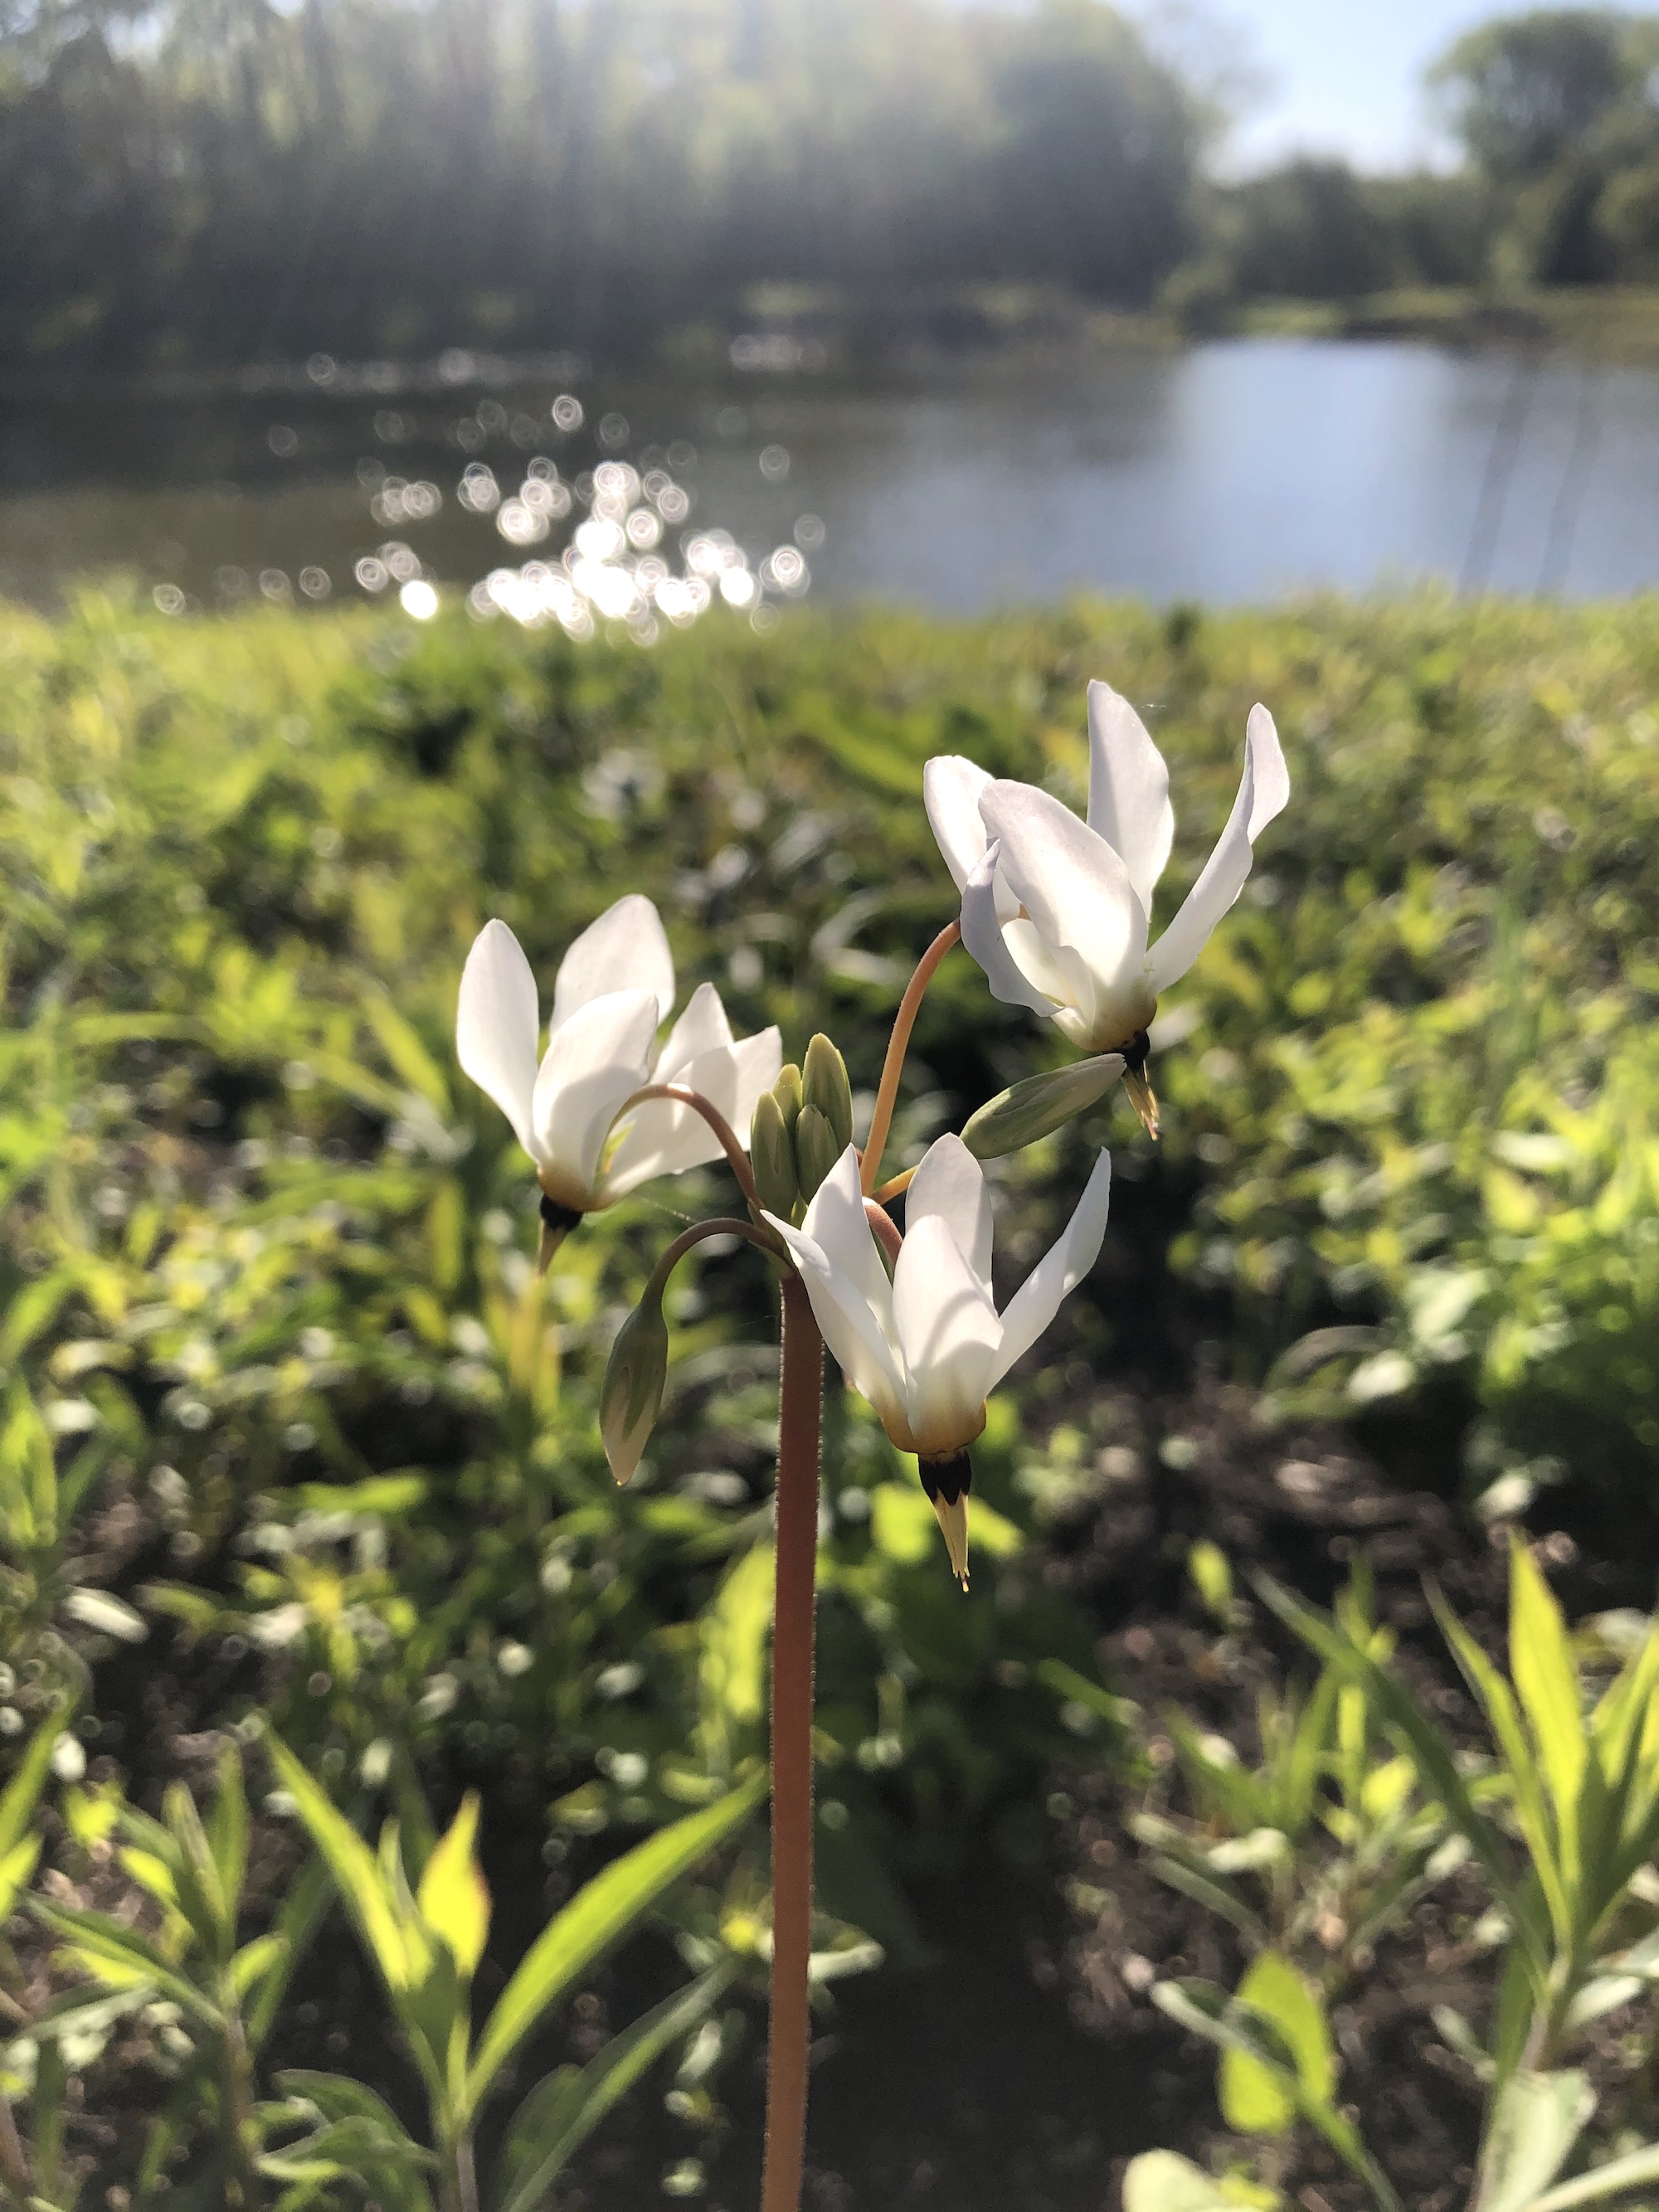 Shooting Star on bank of retaining pond on May 11, 2021.